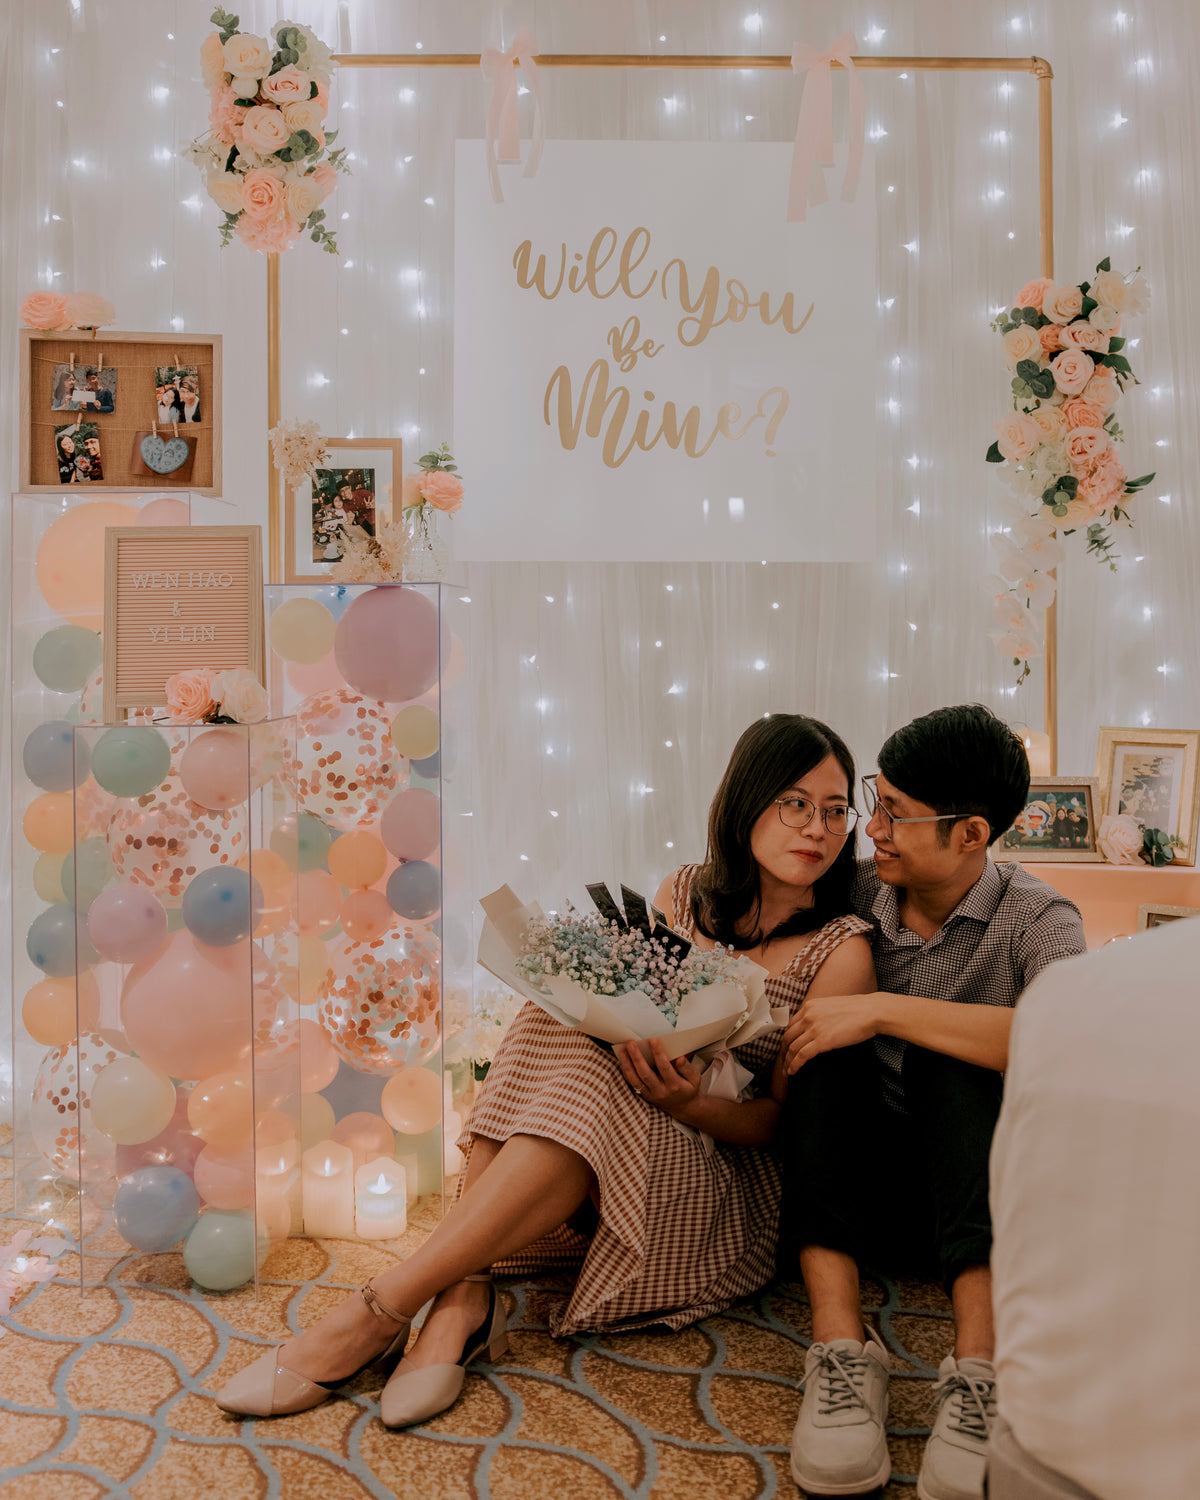 Romantic Hotel Room Proposal in Singapore with Fairylight Backdrop, Pastel Balloons and Flowers by Style It Simply